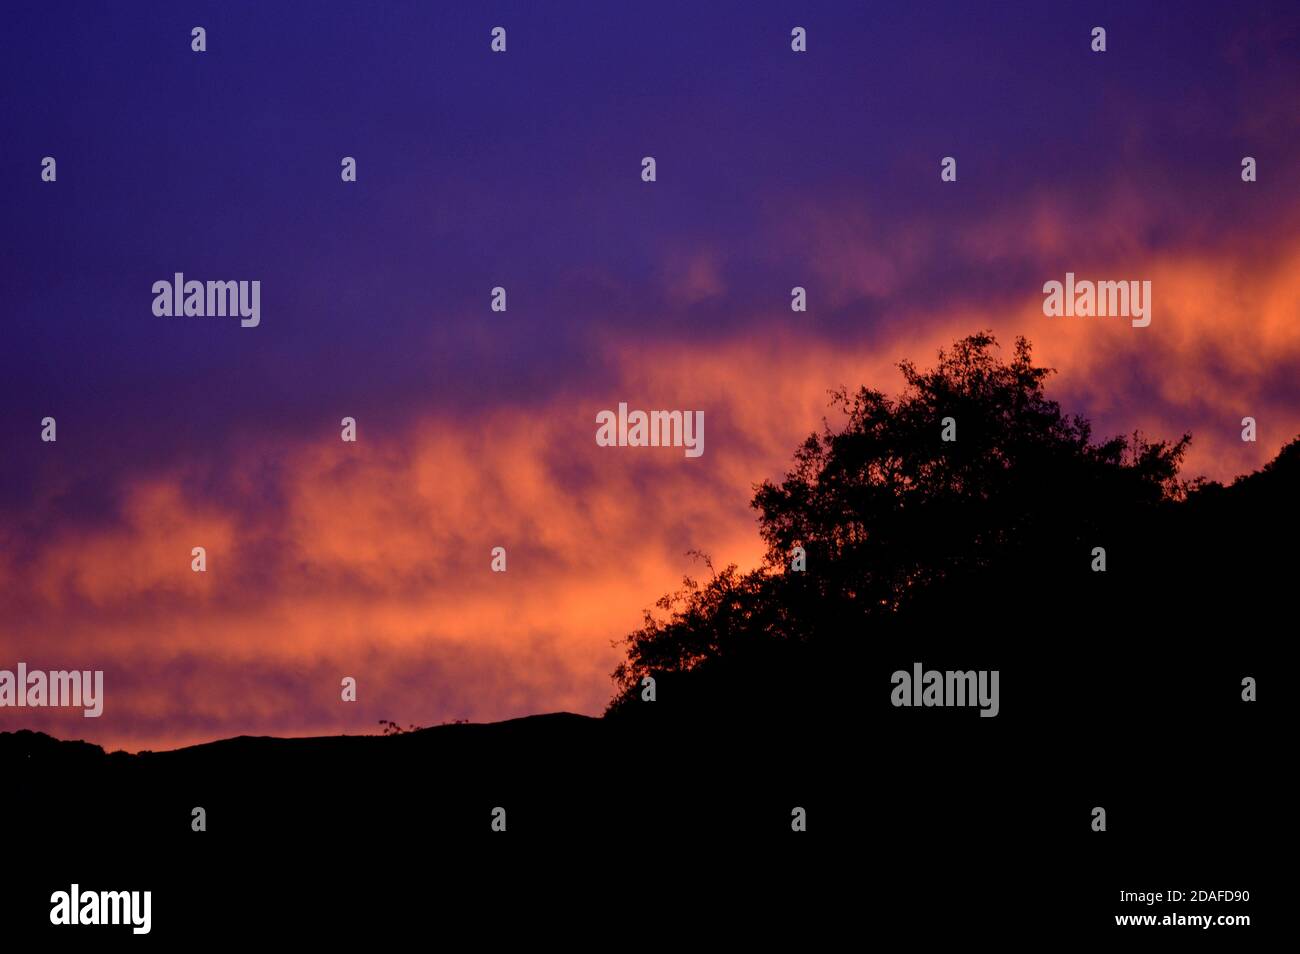 Mountain and tree black silhouette against a deep blue purple sky with clouds in pink and orange undertones Stock Photo